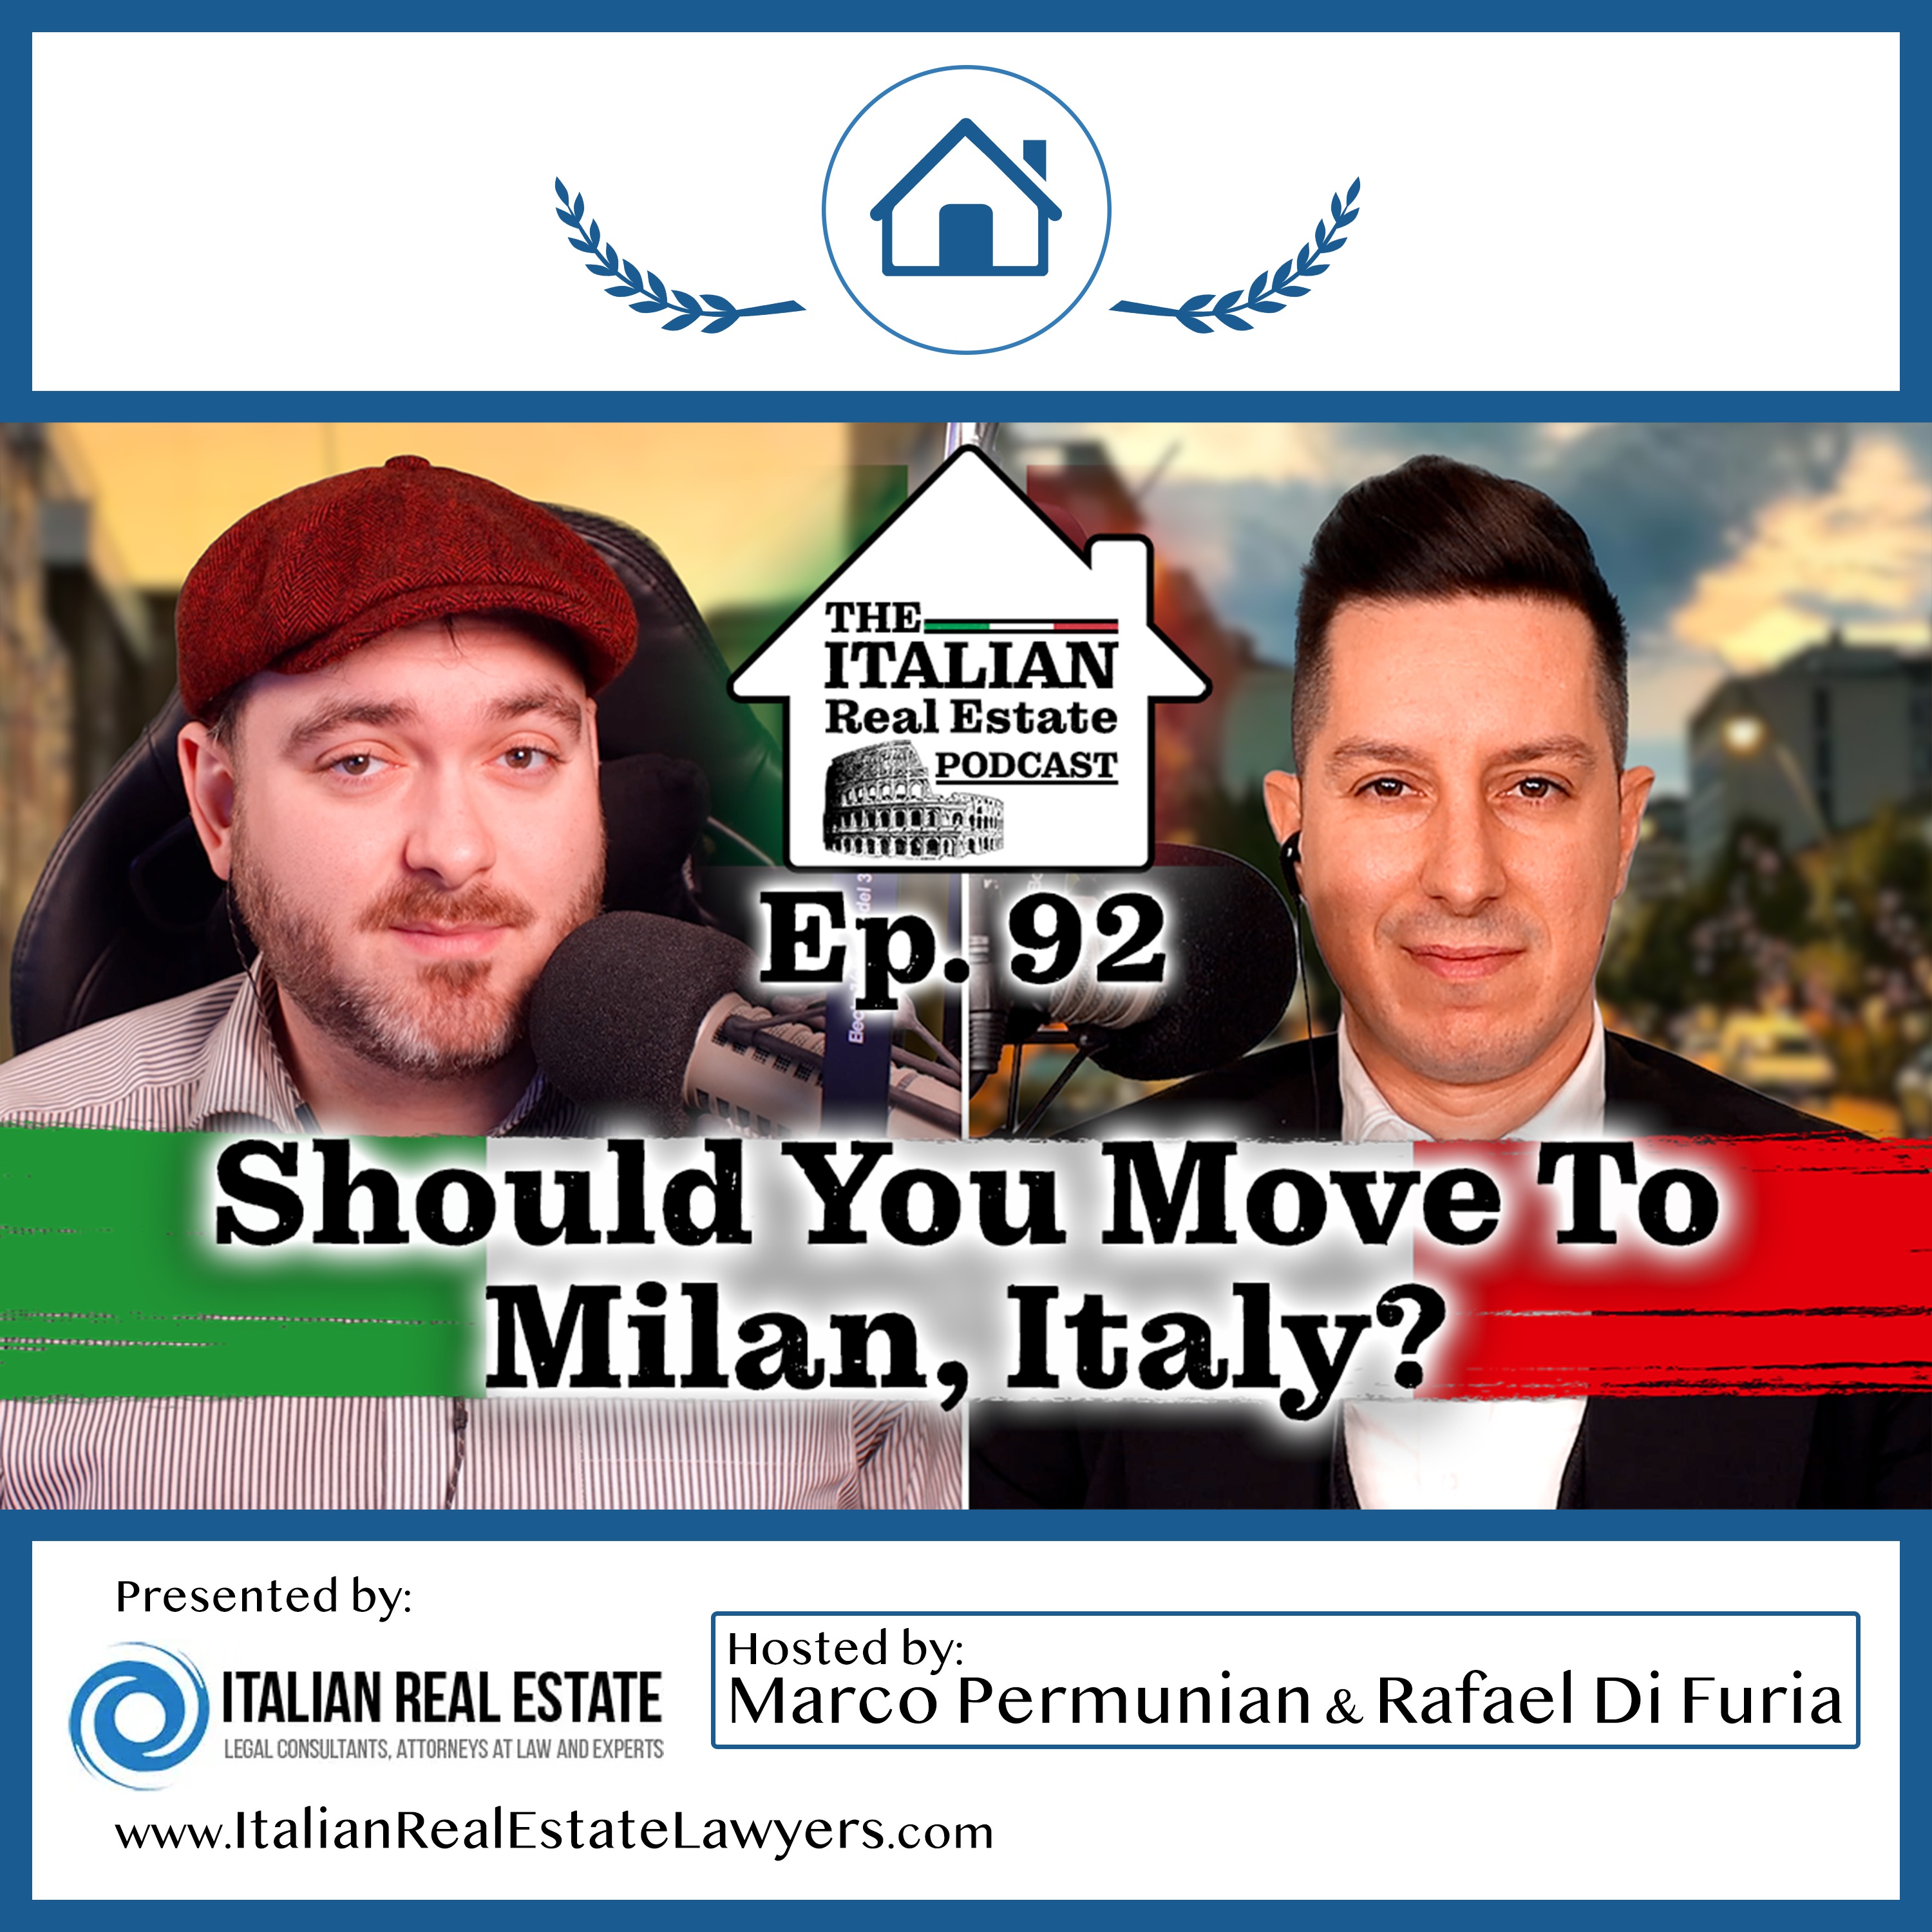 Should You Move to Milan Italy?